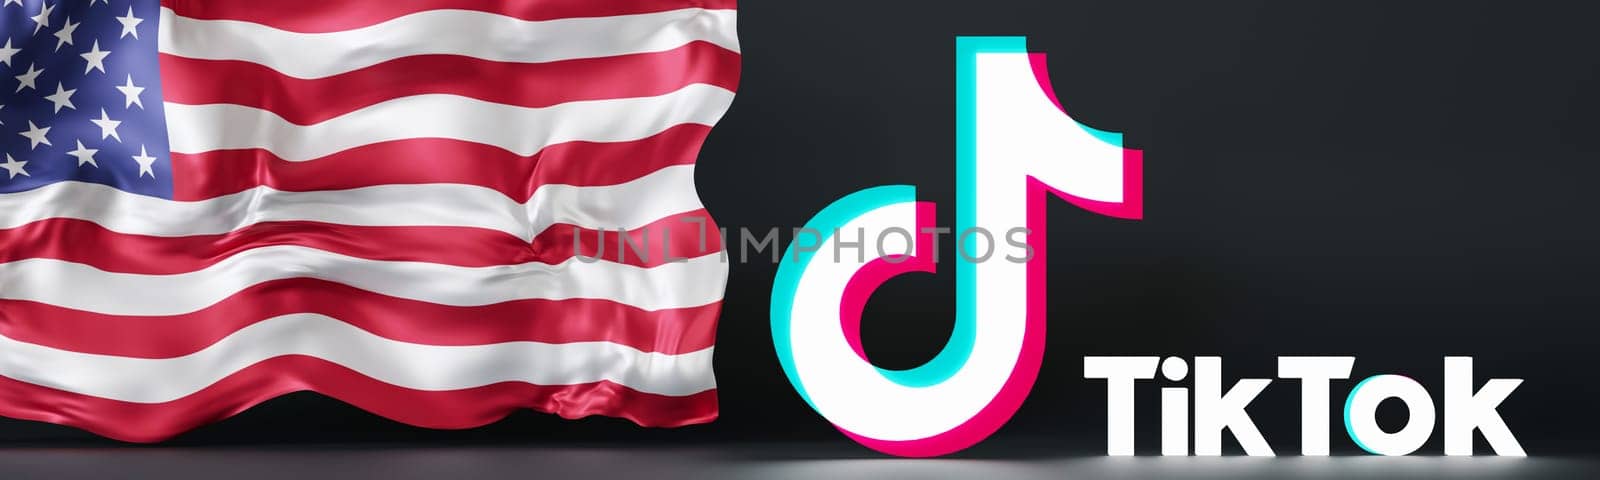 Leipzig, Germany - 15-05-2024: vibrant 3D rendering of the Tik Tok logo and American flag, symbolizing the platforms influence and presence in the USA. Tiktok ban. Panoramic banner. 3D. by creativebird